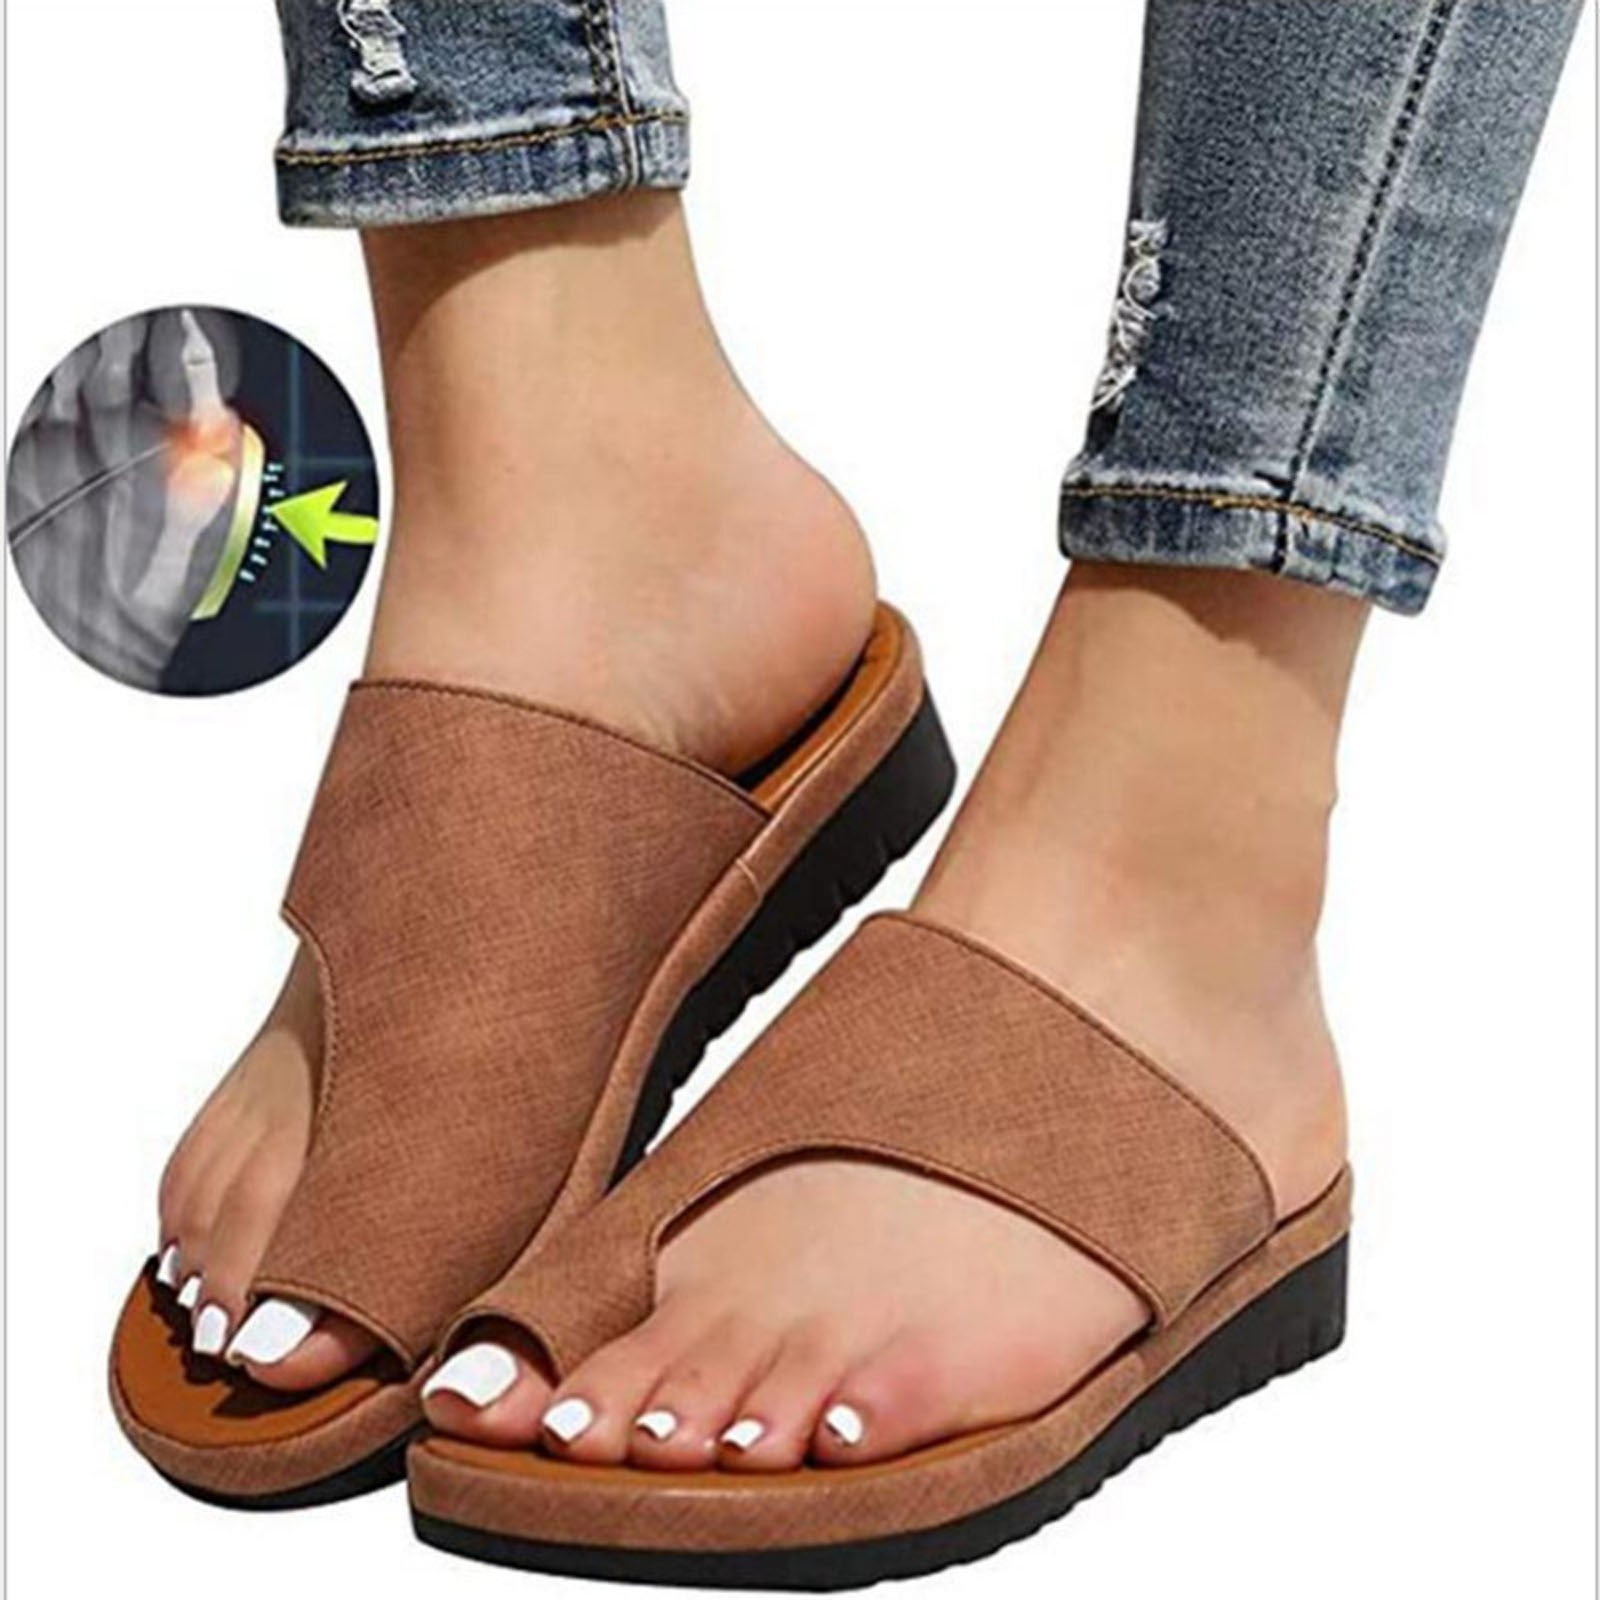 Retro Flat Sandals for Women Women's Fashion Casual Ring Toe Wedges Leopard Leather Slippers Sandals Open Toe Roman Outdoor Beach Shoes Sandals Flat Slipper 